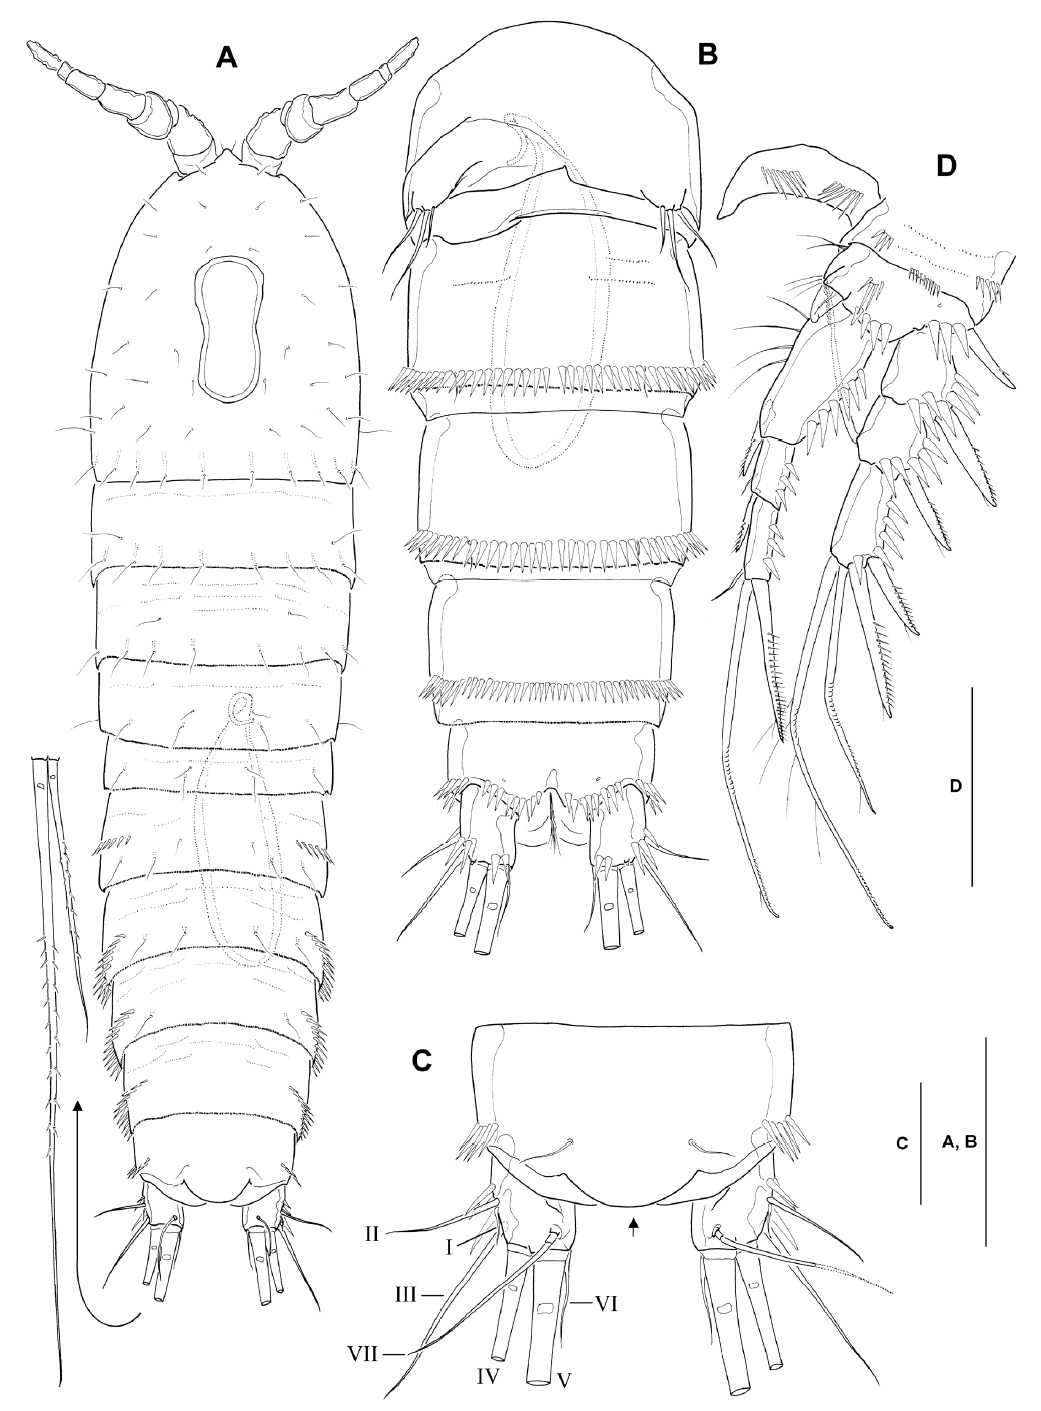 Bryocamptus jejuensis, male. A, Habitus, dorsal; B, Urosome (excluding leg 5-bearing somite), ventral; C, Anal somite (anal operculum arrowed) and caudal rami, dorsal; D, Leg 1, anterior. Scale bars: A=0.1 mm, B-D=0.05 mm.